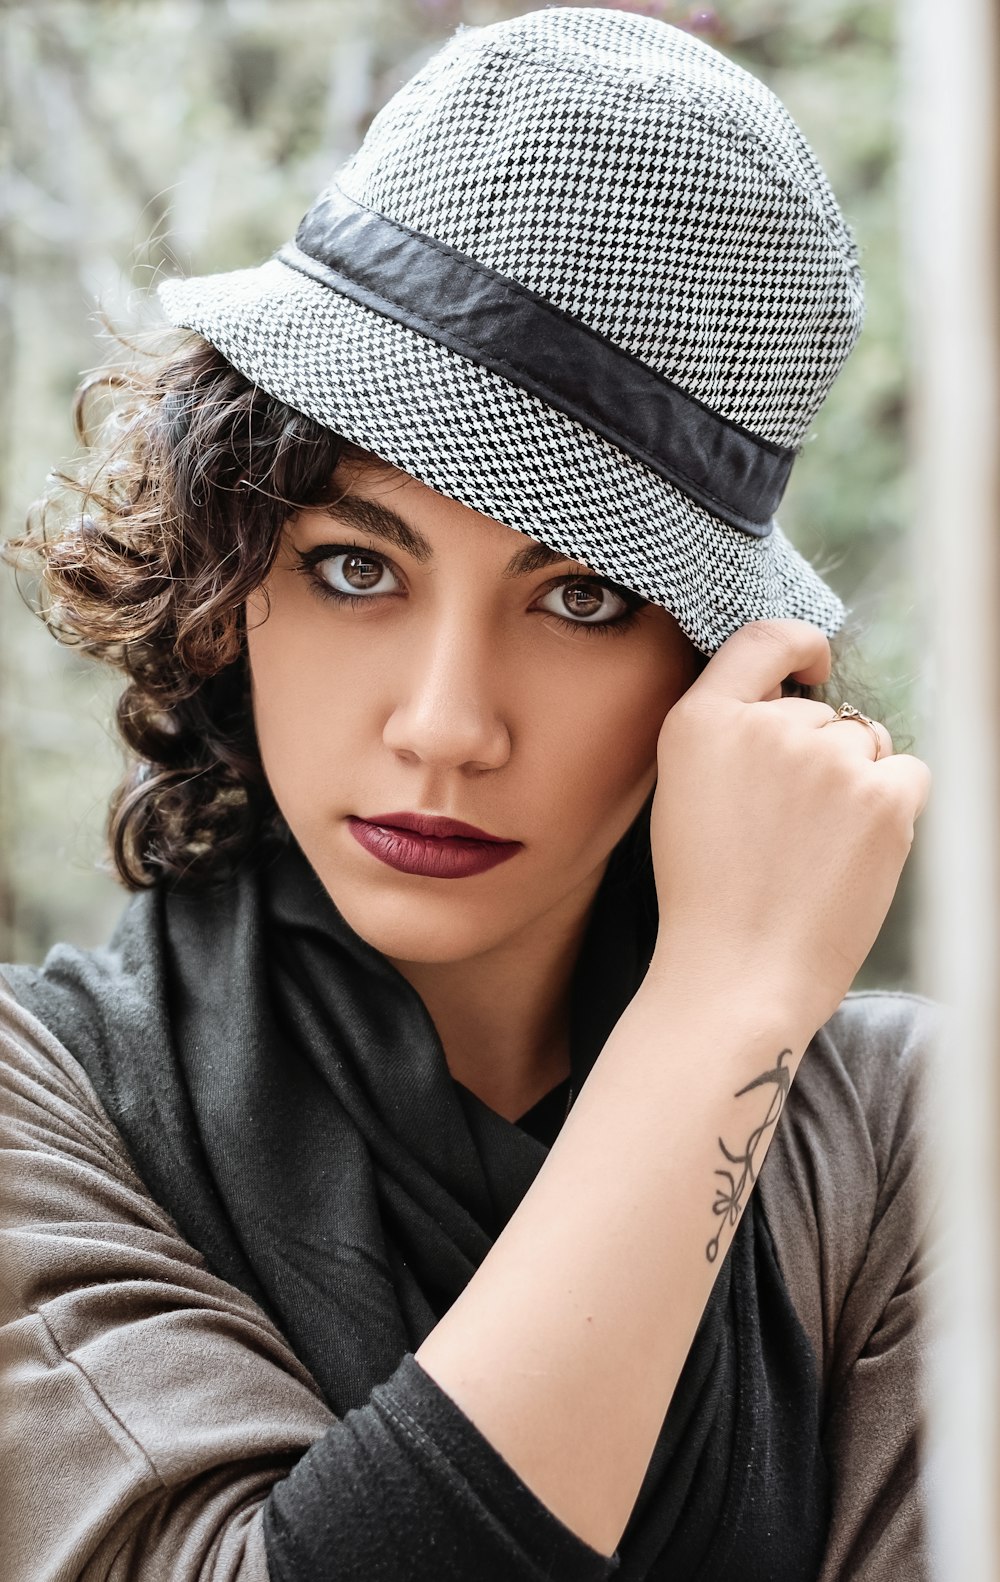 woman in gray and black hat